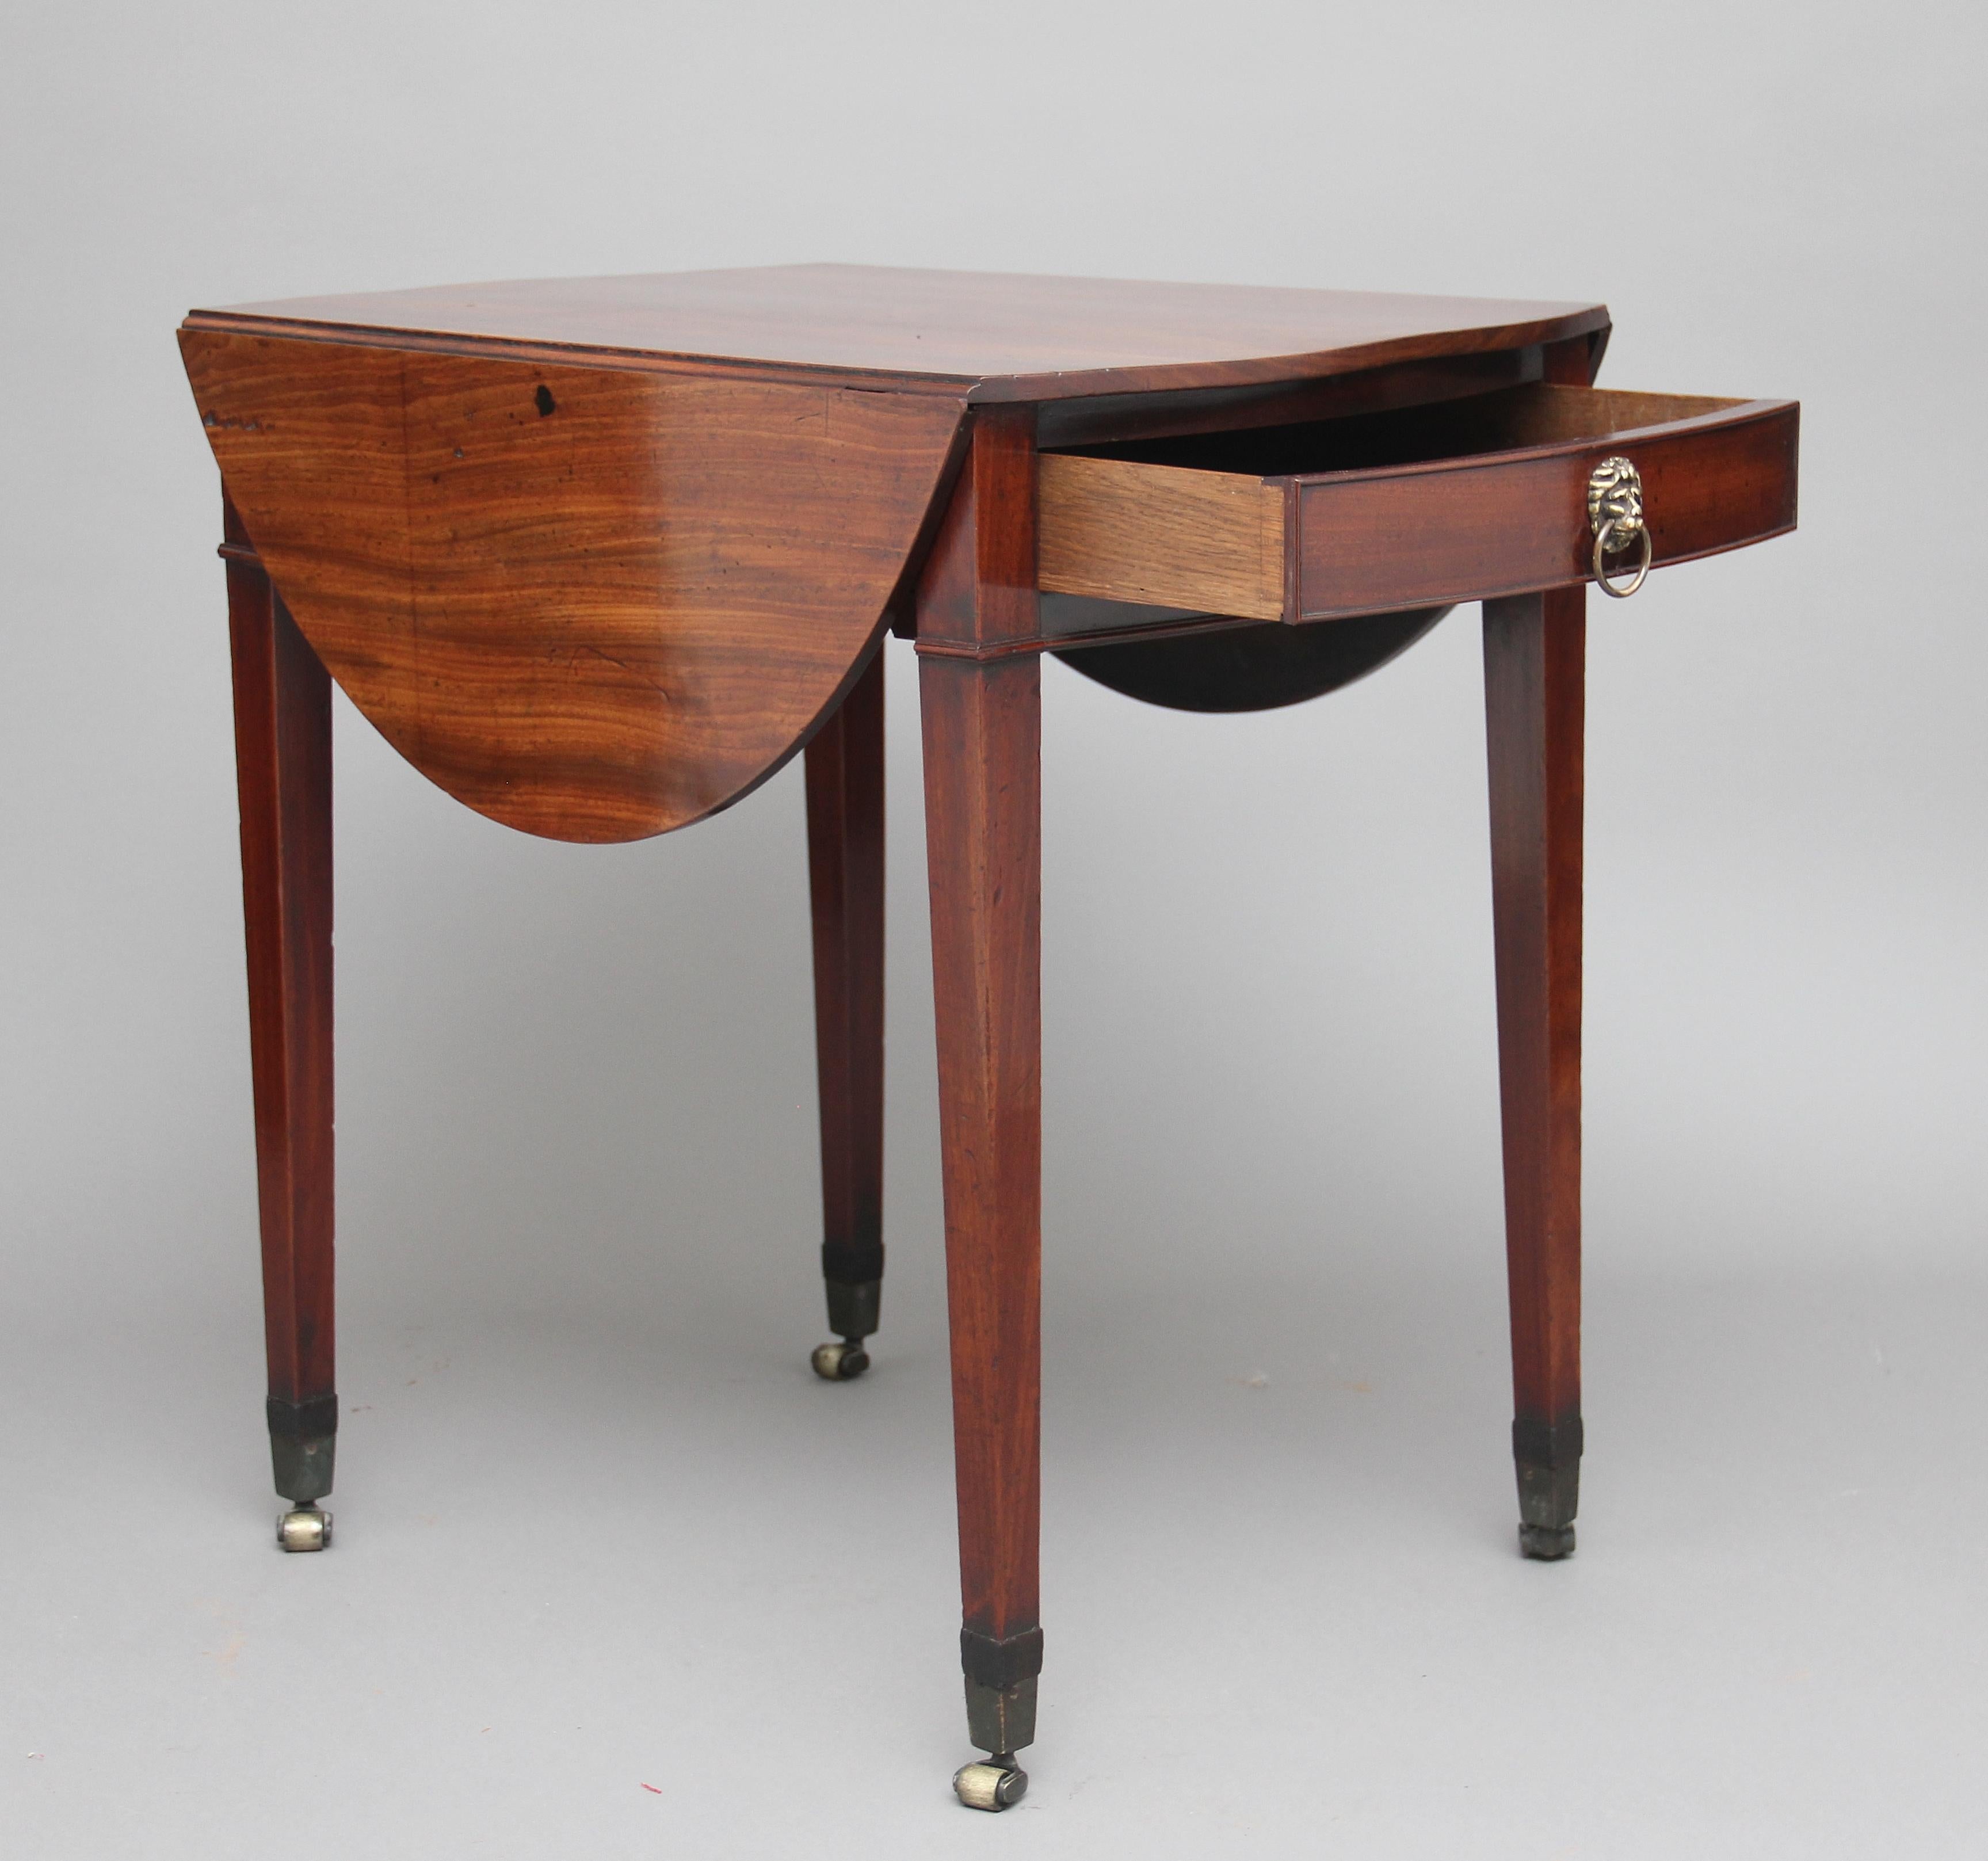 18th century mahogany pembroke table, having a lovely figured solid mahogany top with drop leafs, a single oak lined drawer at one end with original brass lion head handle, supported on four square tapering legs terminating on brass castors, circa